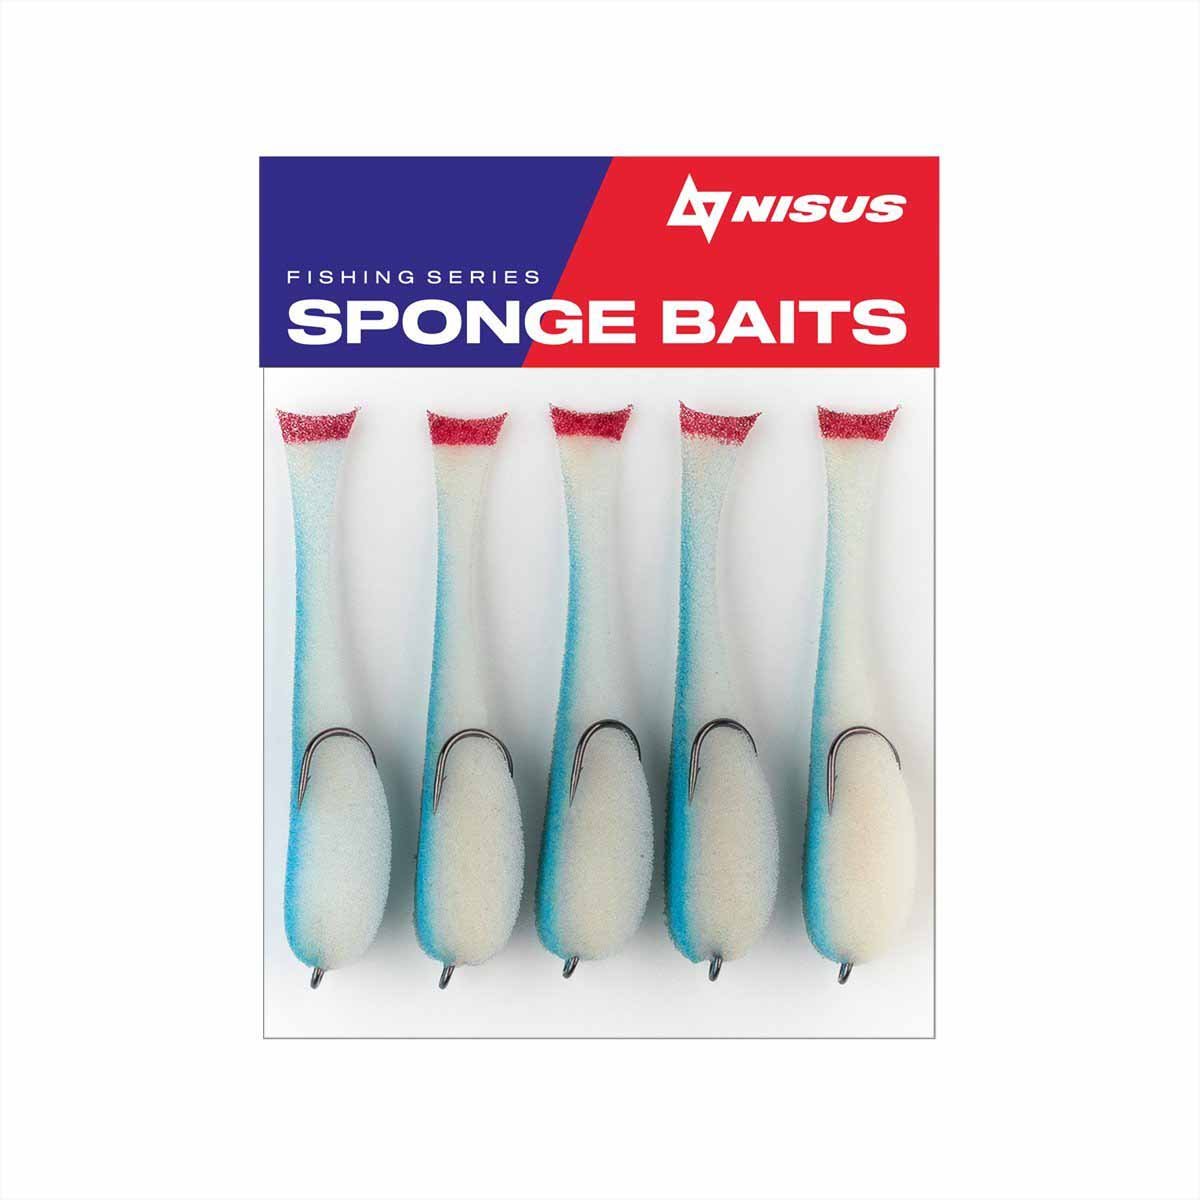 5" Sponge Bait with a Double Hook for Predatory Fish, Multi-Colored, 5 pcs